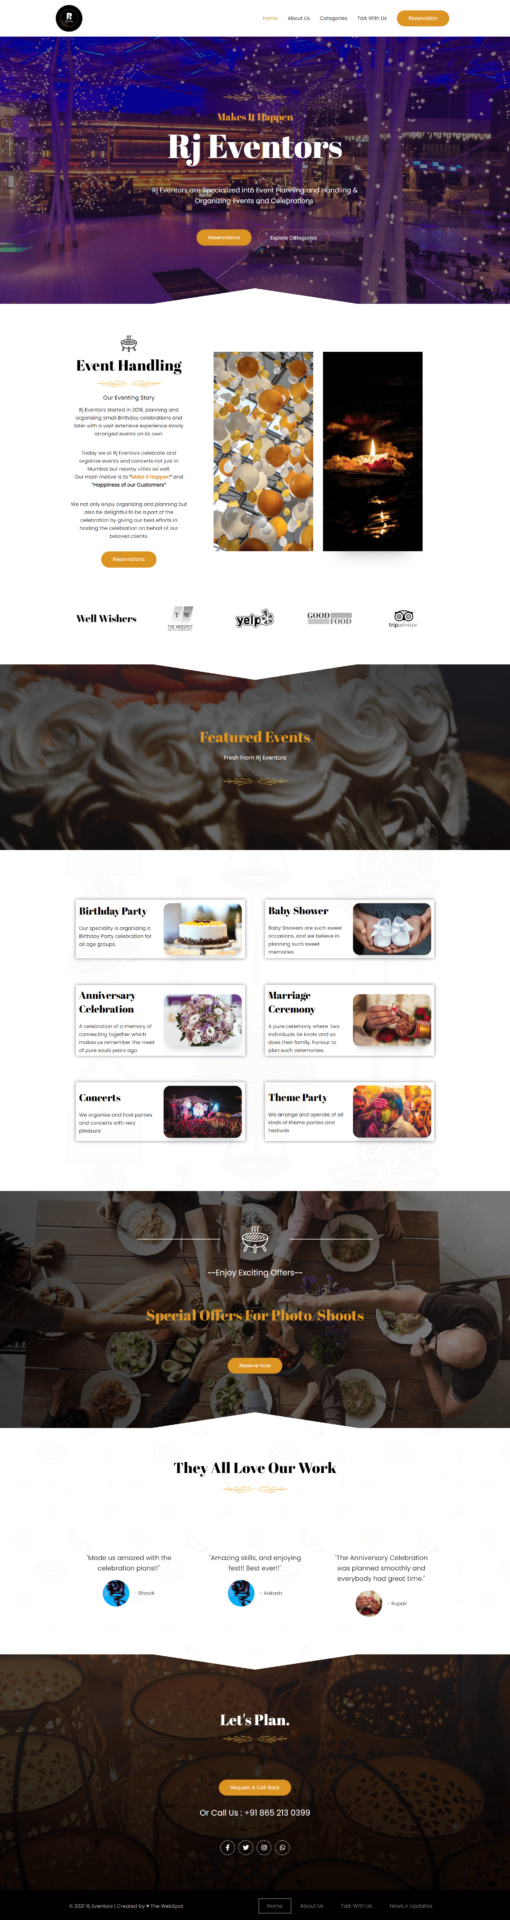 Rj-Eventors-Website-Homepage-Made-by-The-WebSpot(Our-Work)